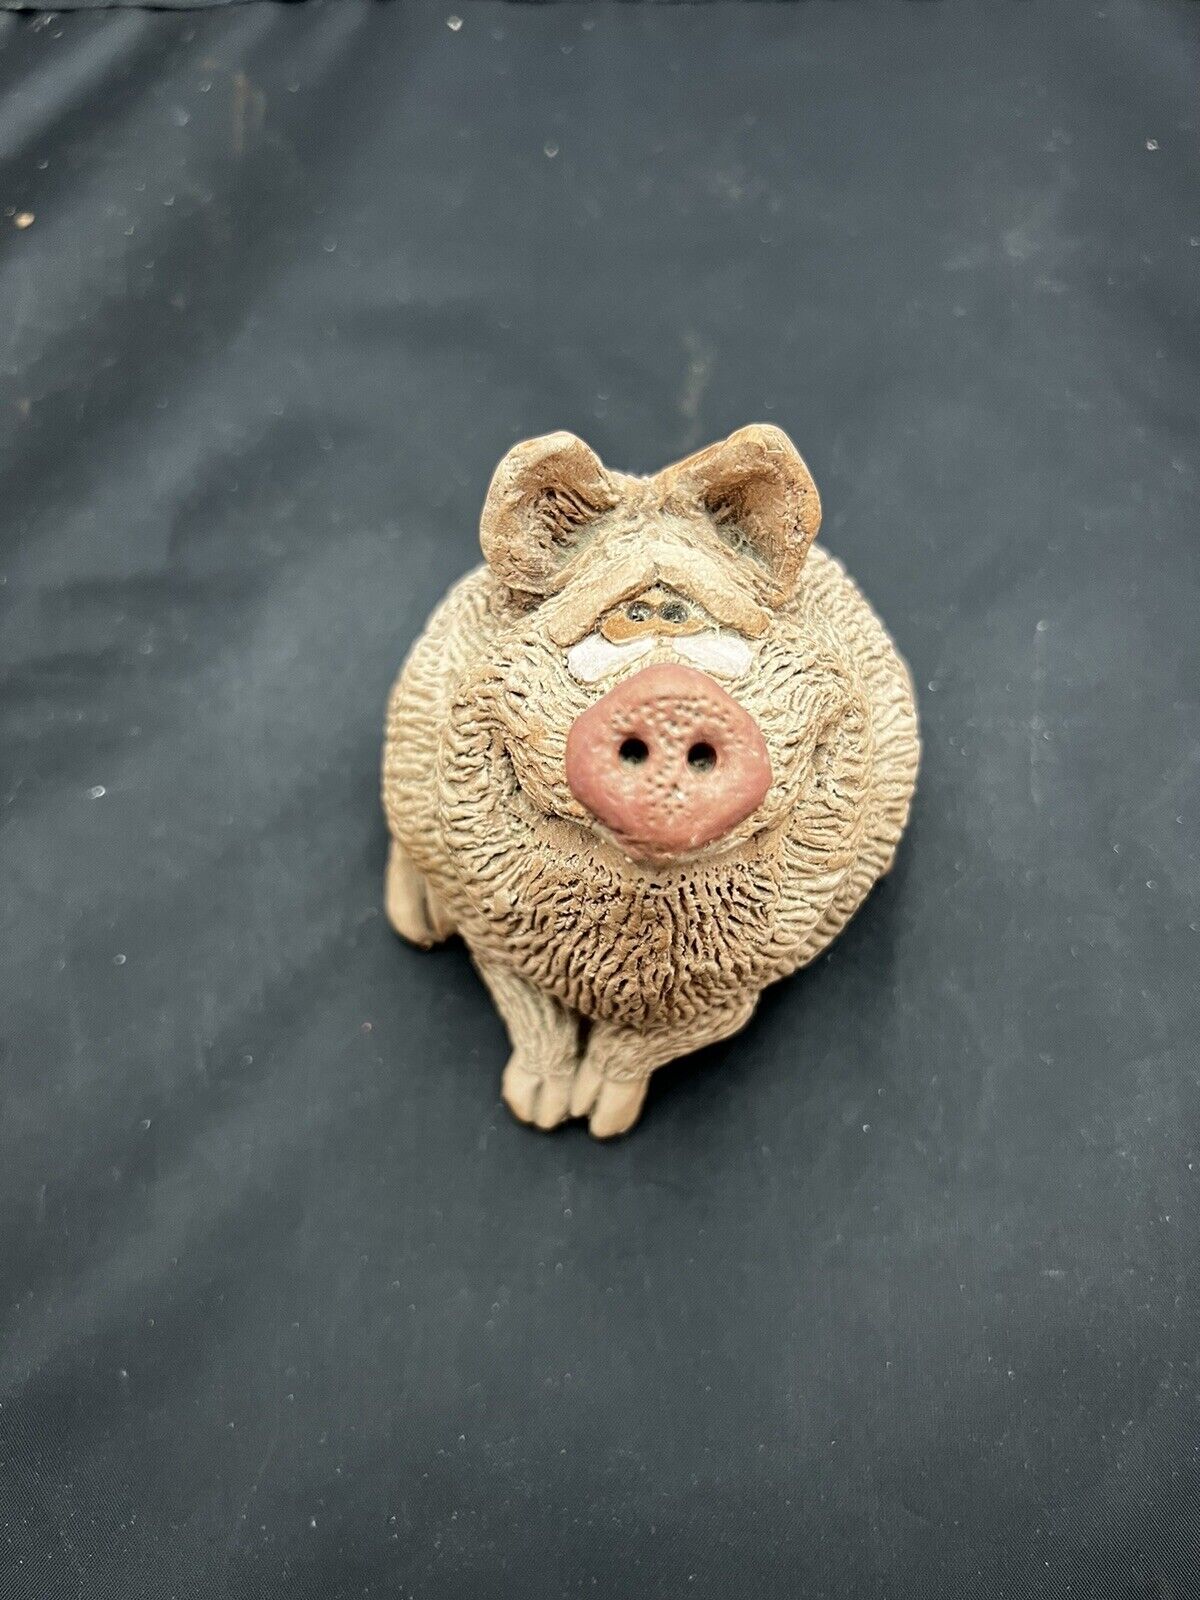 Vintage Textured Pig Figurine Quirky Paper Weight Whimsical Farmhouse Decor